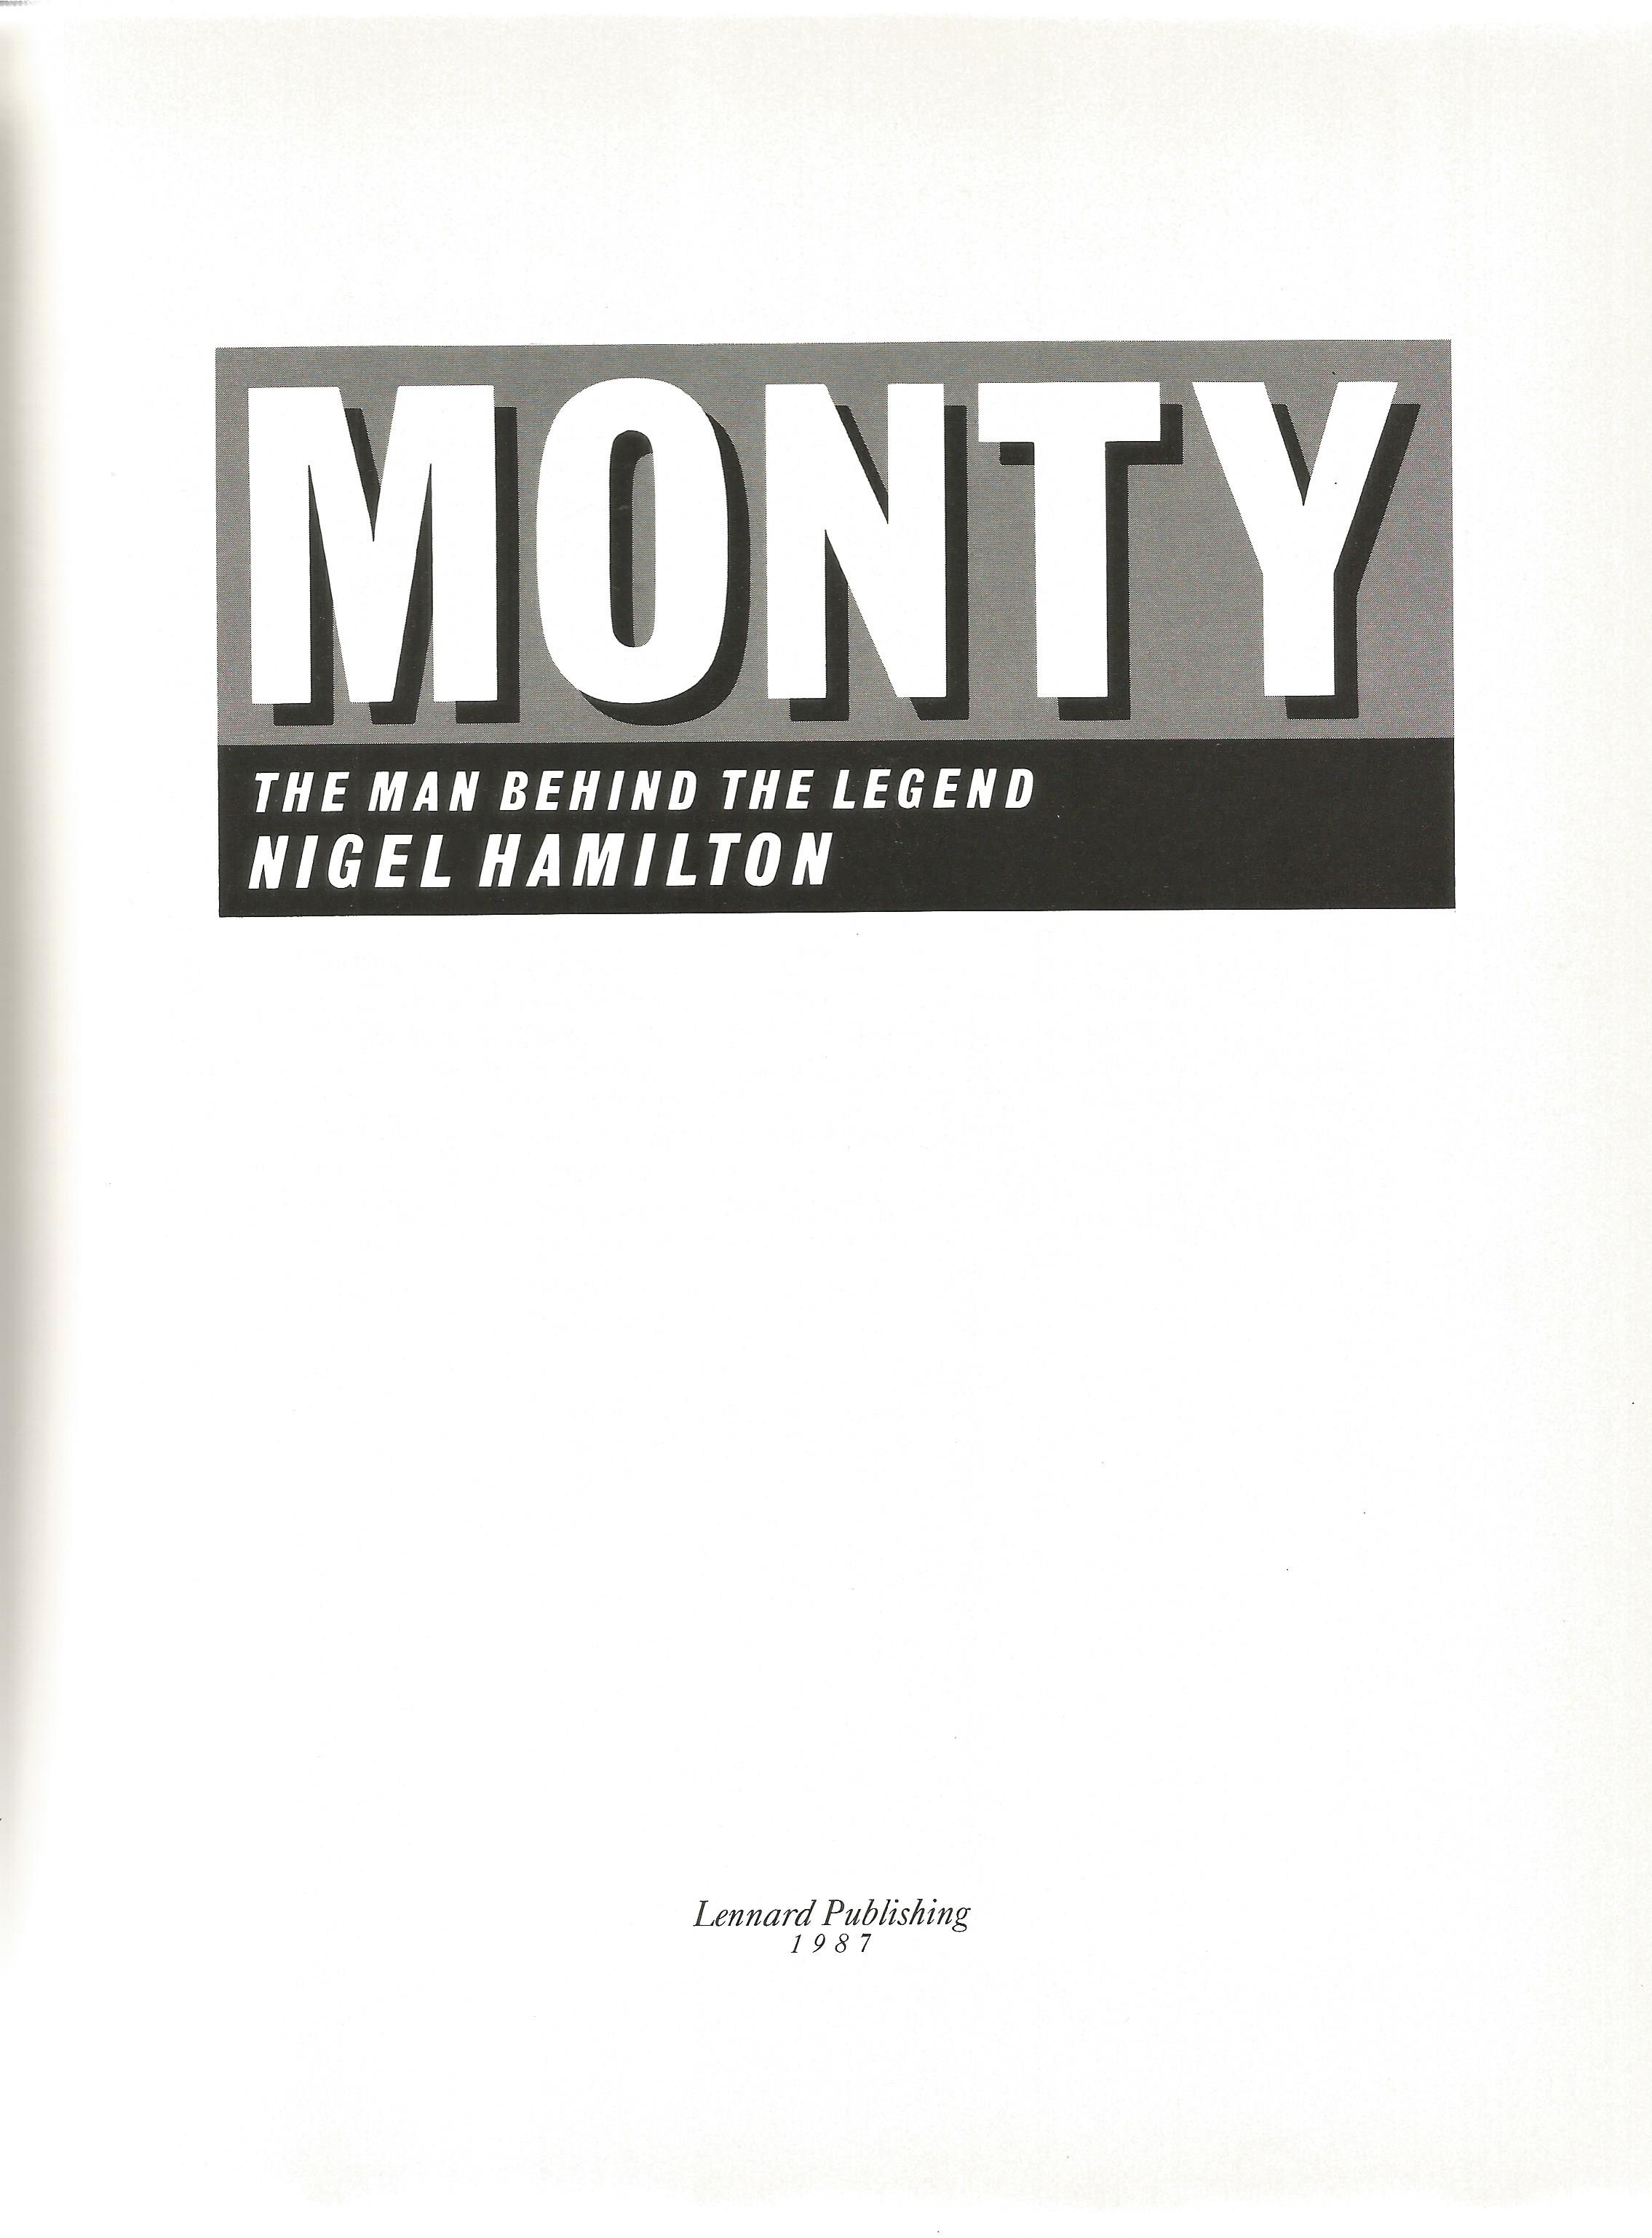 Monty The Man Behind the Legend by Nigel Hamilton Hardback Book 1987 First Edition published by - Image 2 of 3